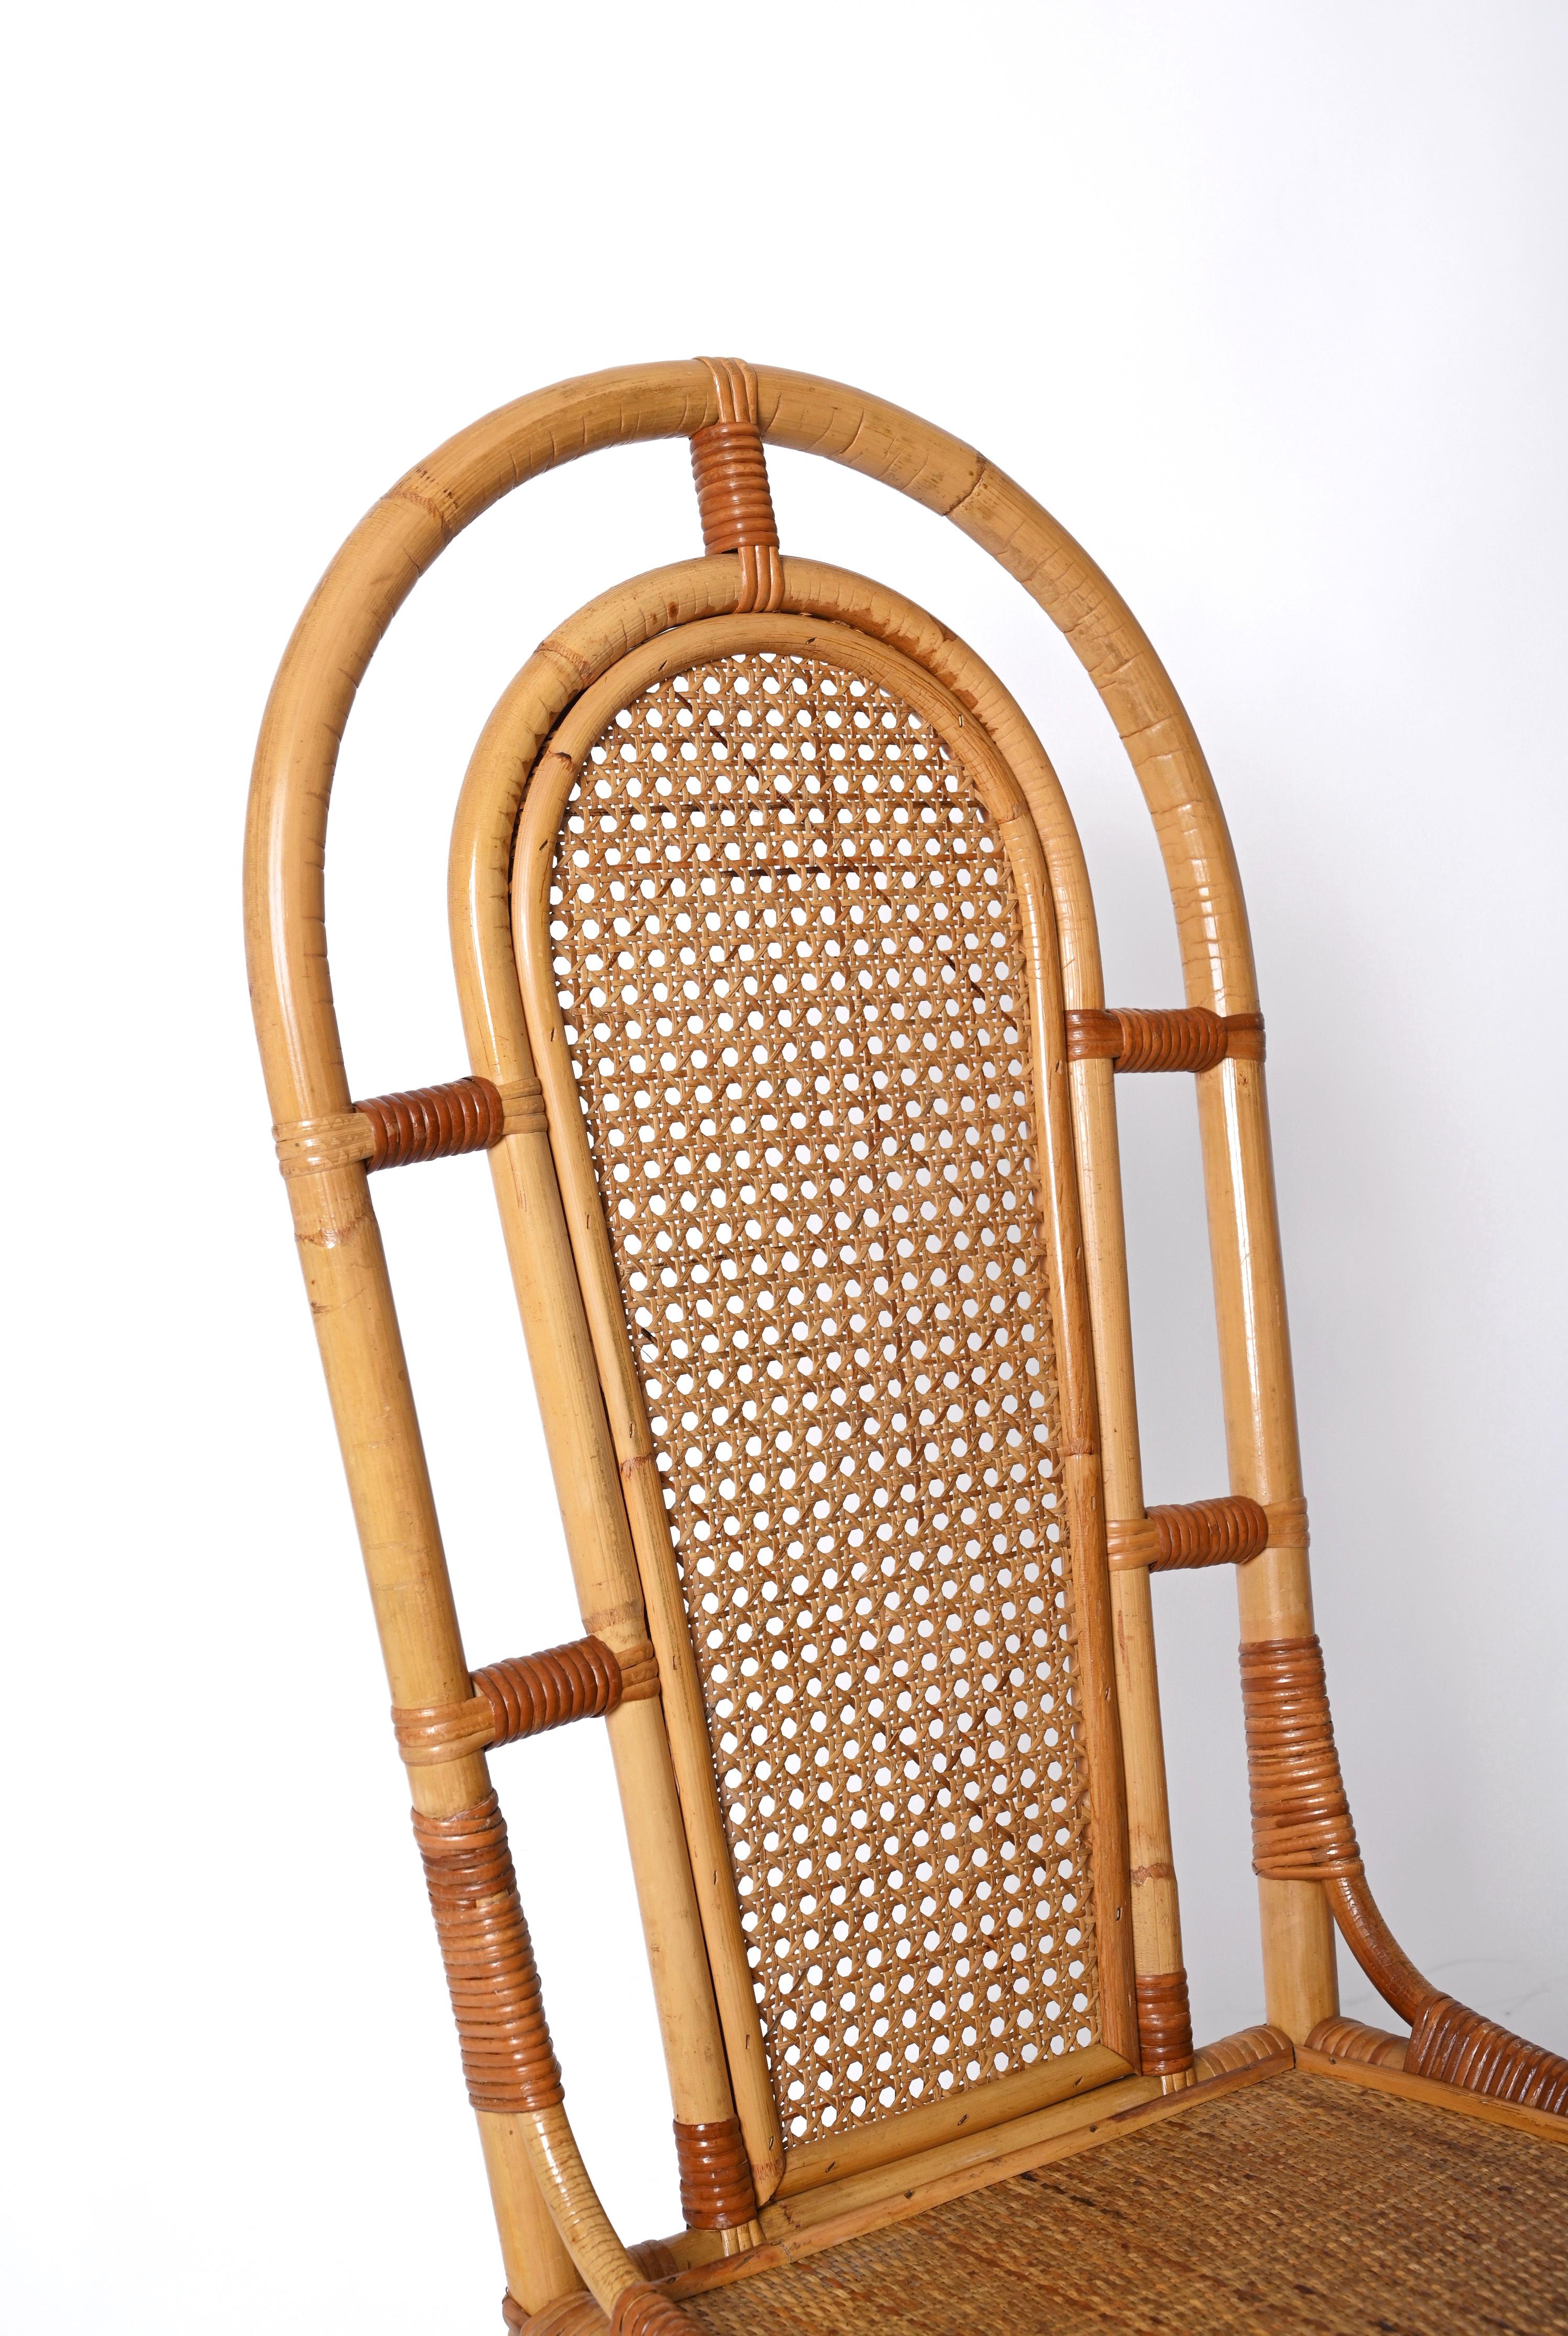 Sef of Four Bamboo and Vienna Straw Chairs, Vivai Del Sud, Italy 1970s For Sale 2